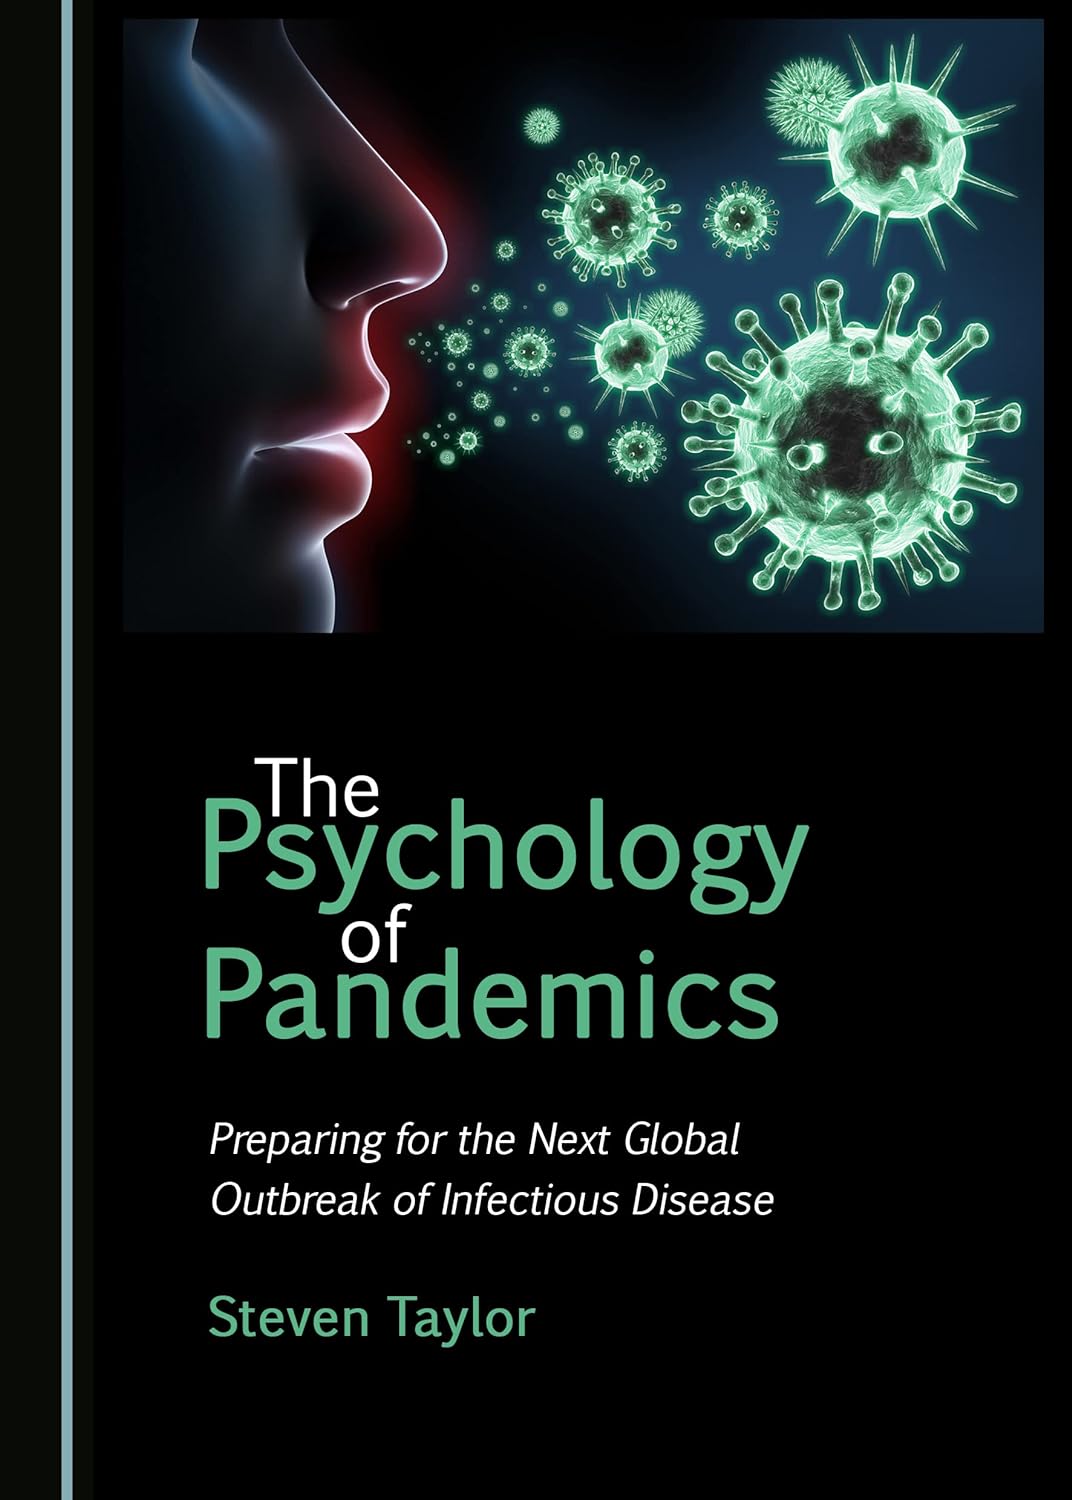 The Psychology of Pandemics